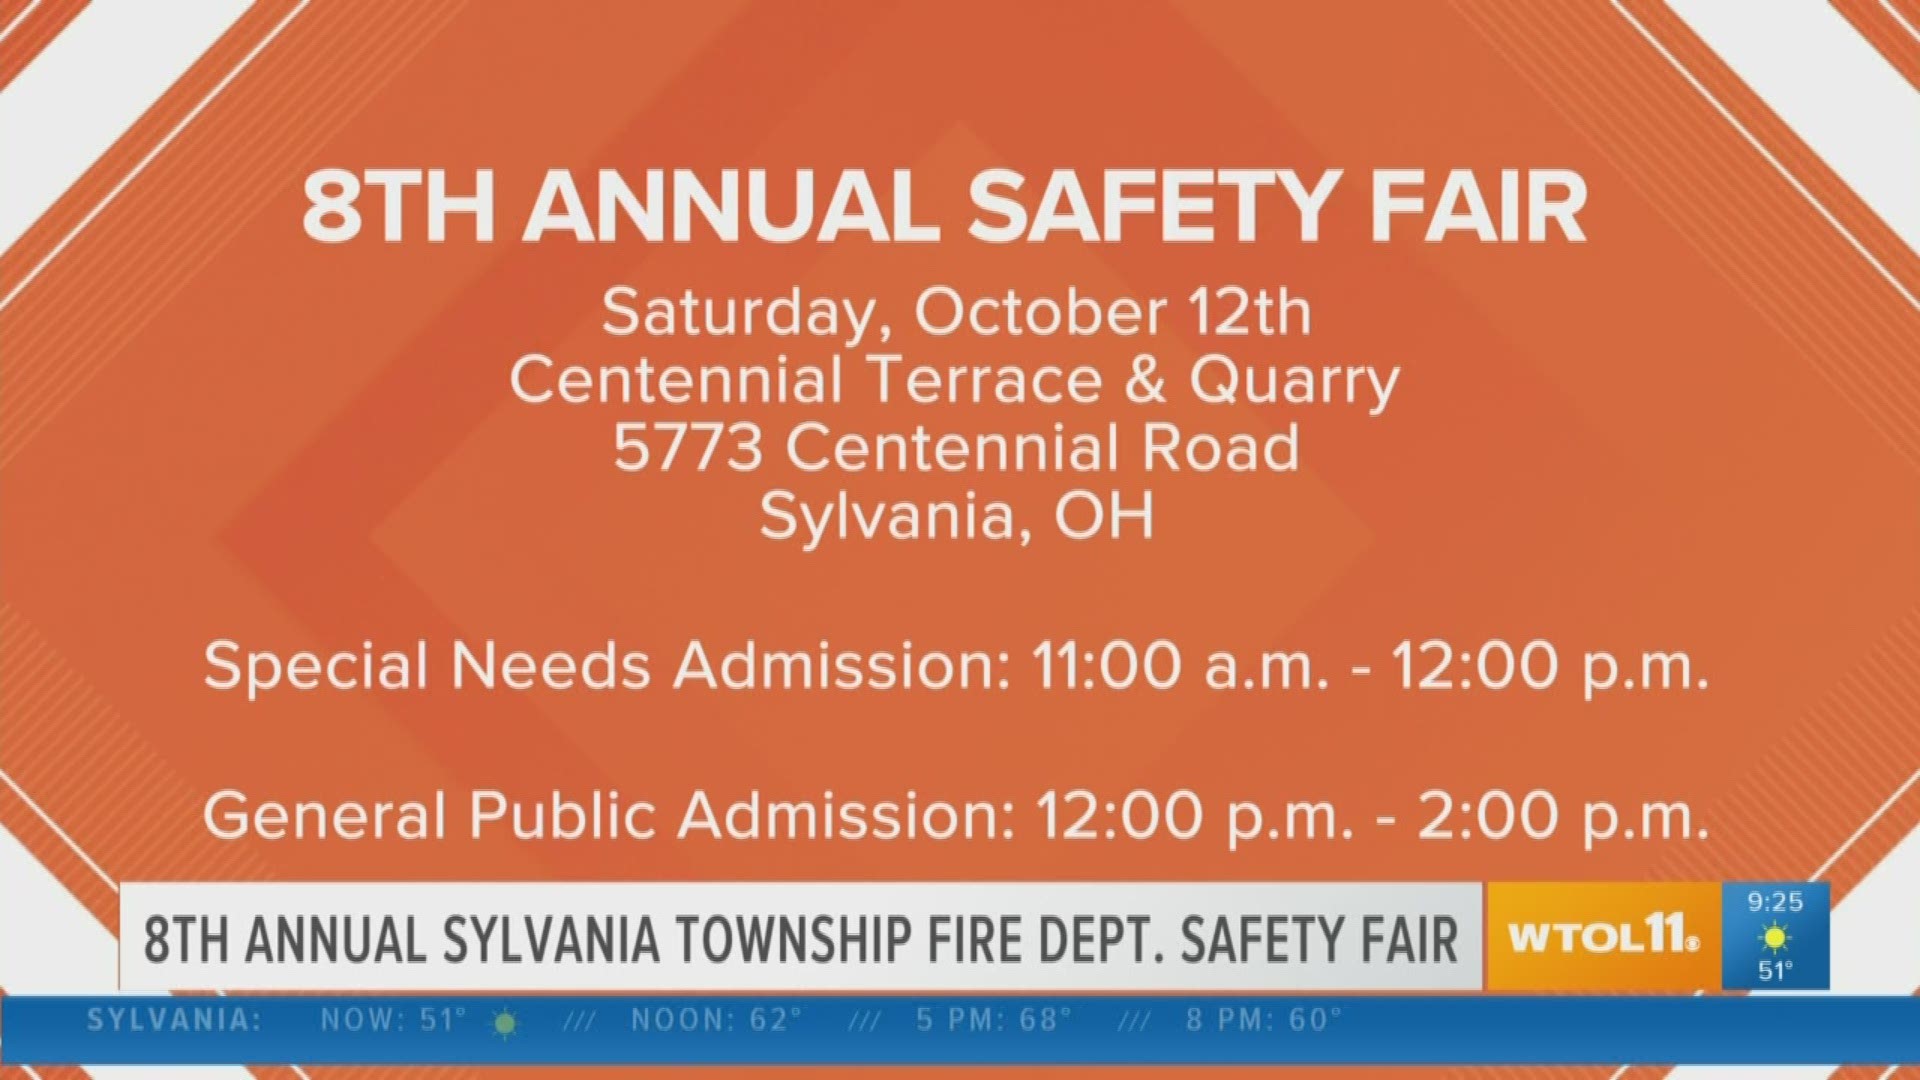 The event is in honor National Fire Prevention Week. It kicks off this Saturday at the Centennial Terrace and Quarry in Sylvania.